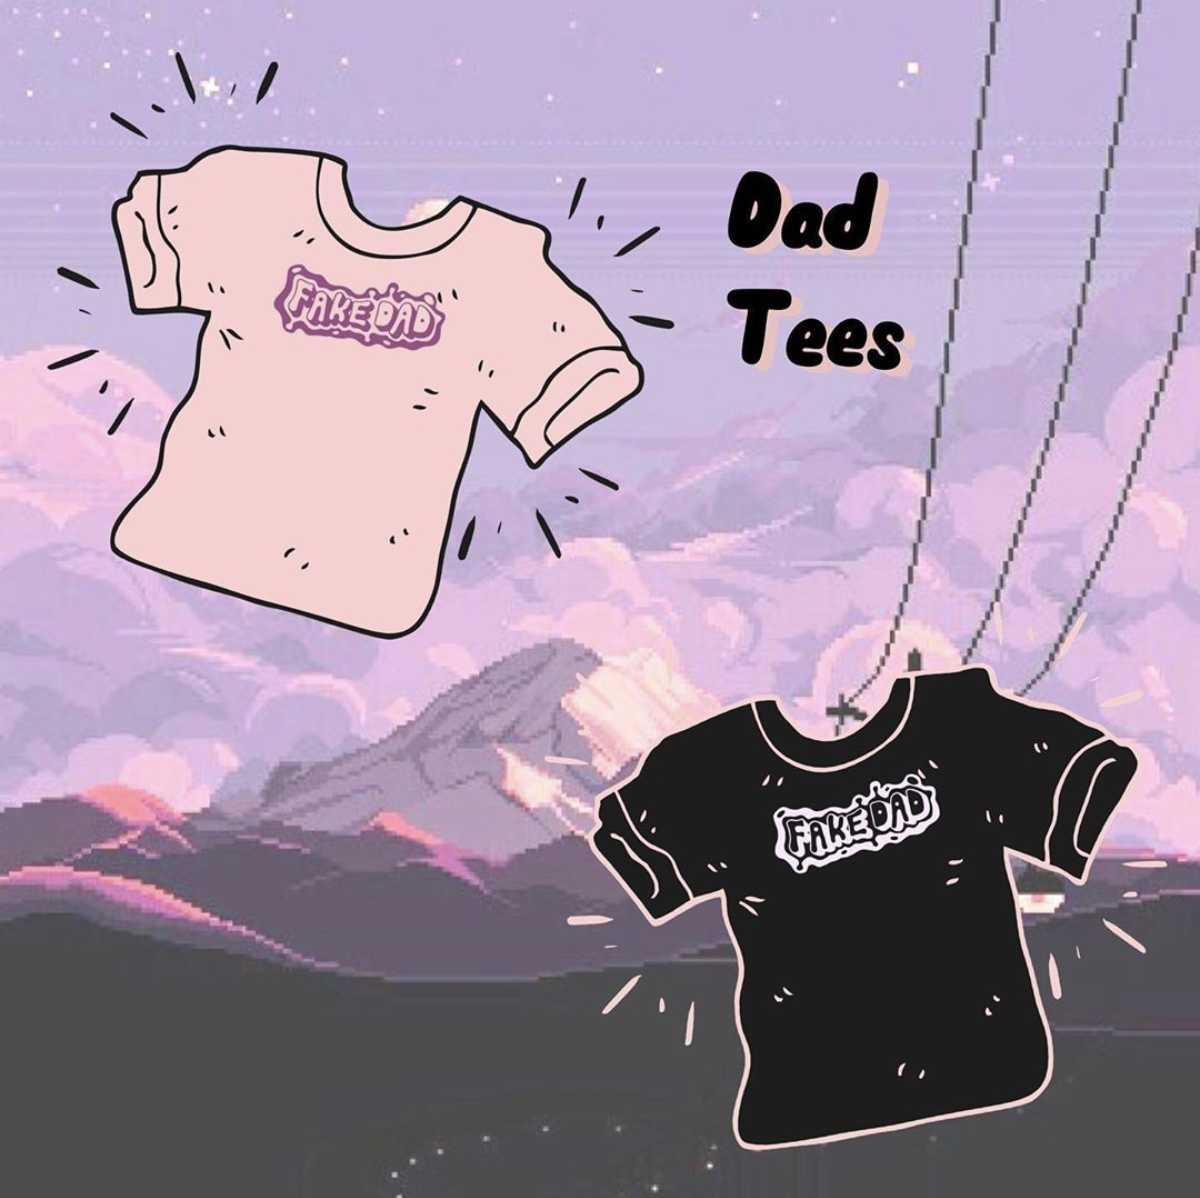 Just a reminder that if you like t-shirts and supporting indie artists, we have a v official merch page ¯\ _(ツ)_/¯ merch.fakedadtheband.com